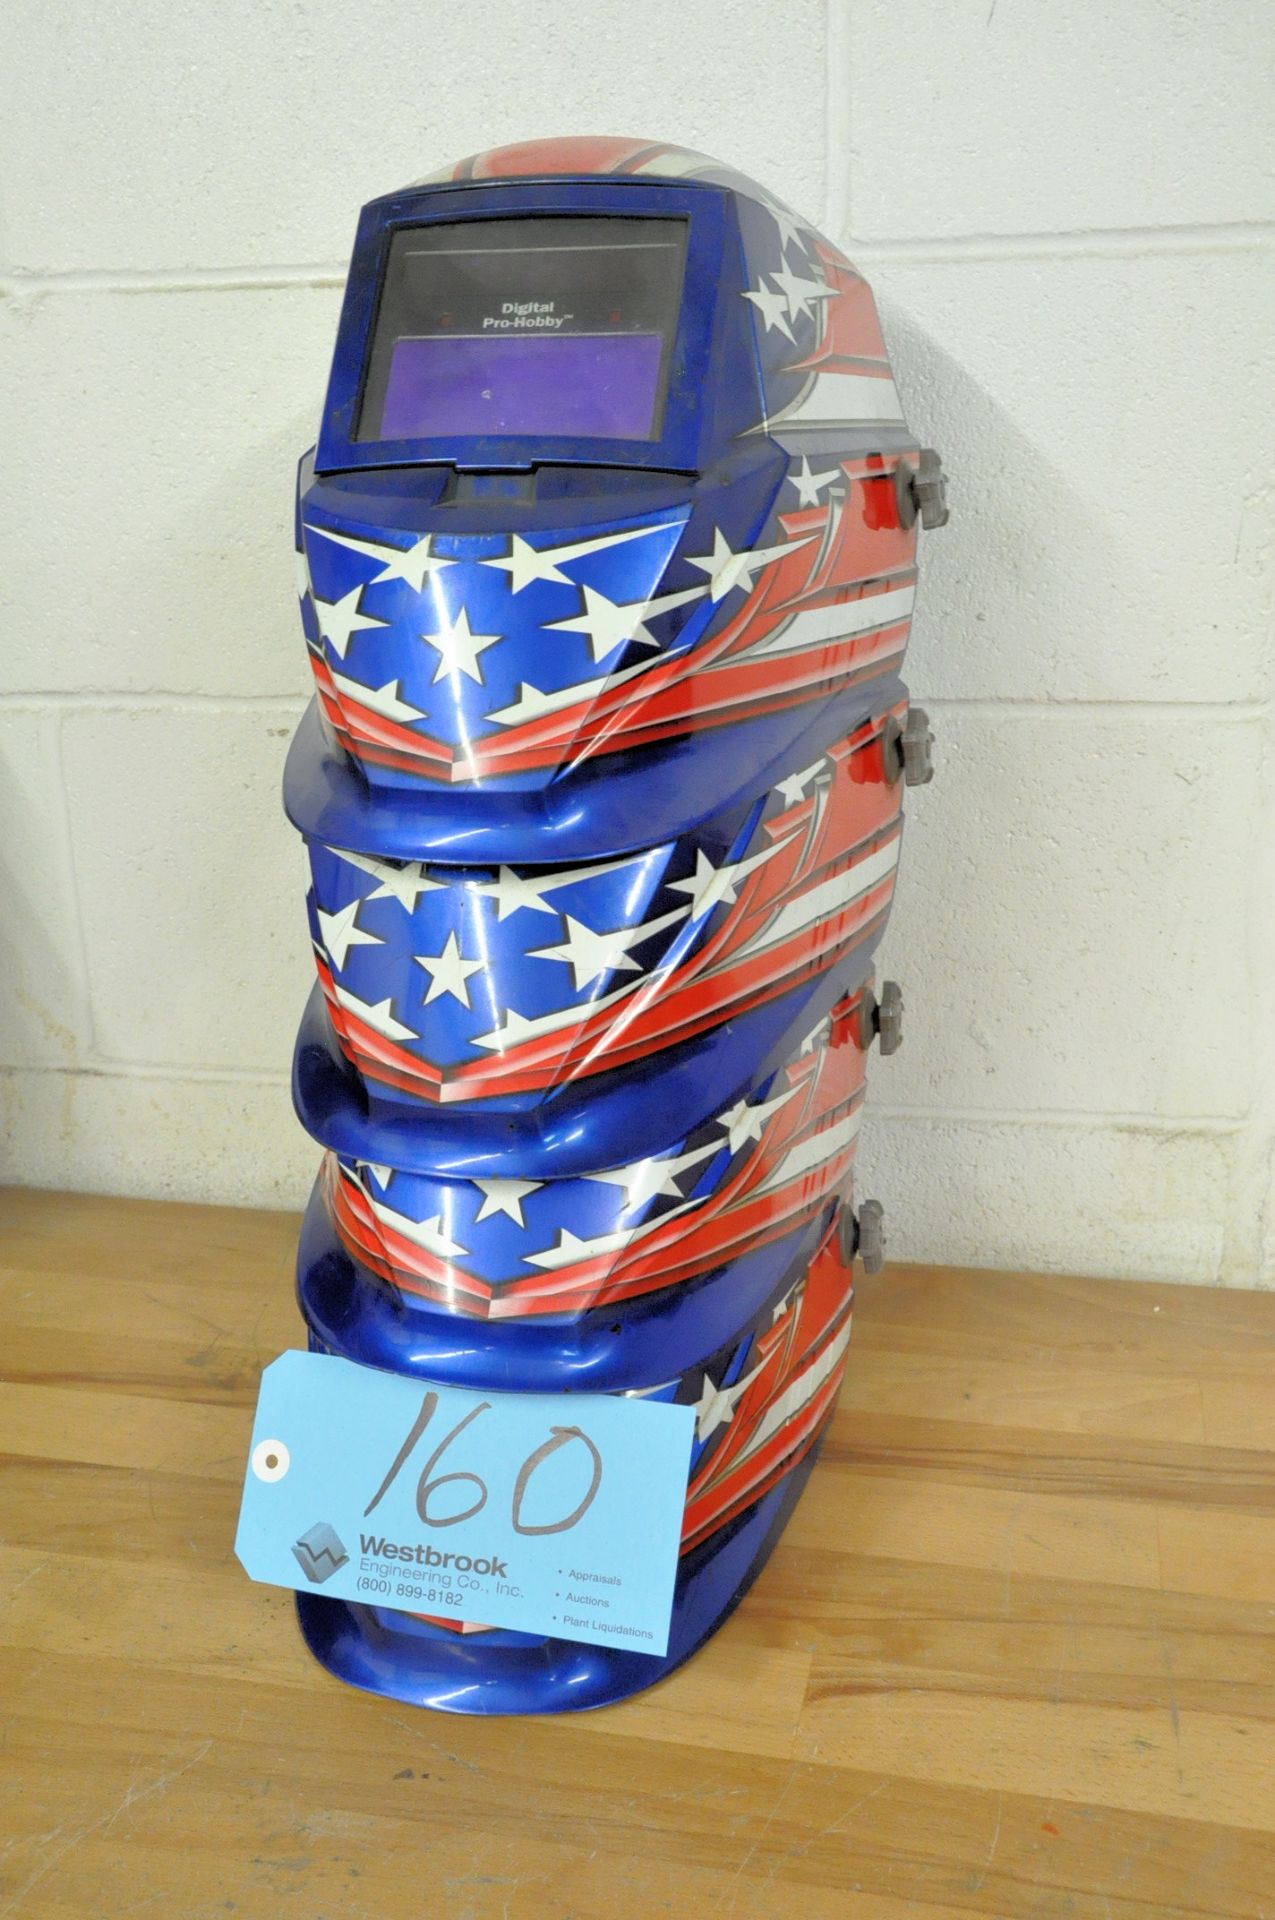 Lot-"Stars and Stripes" Face Shield Helmets